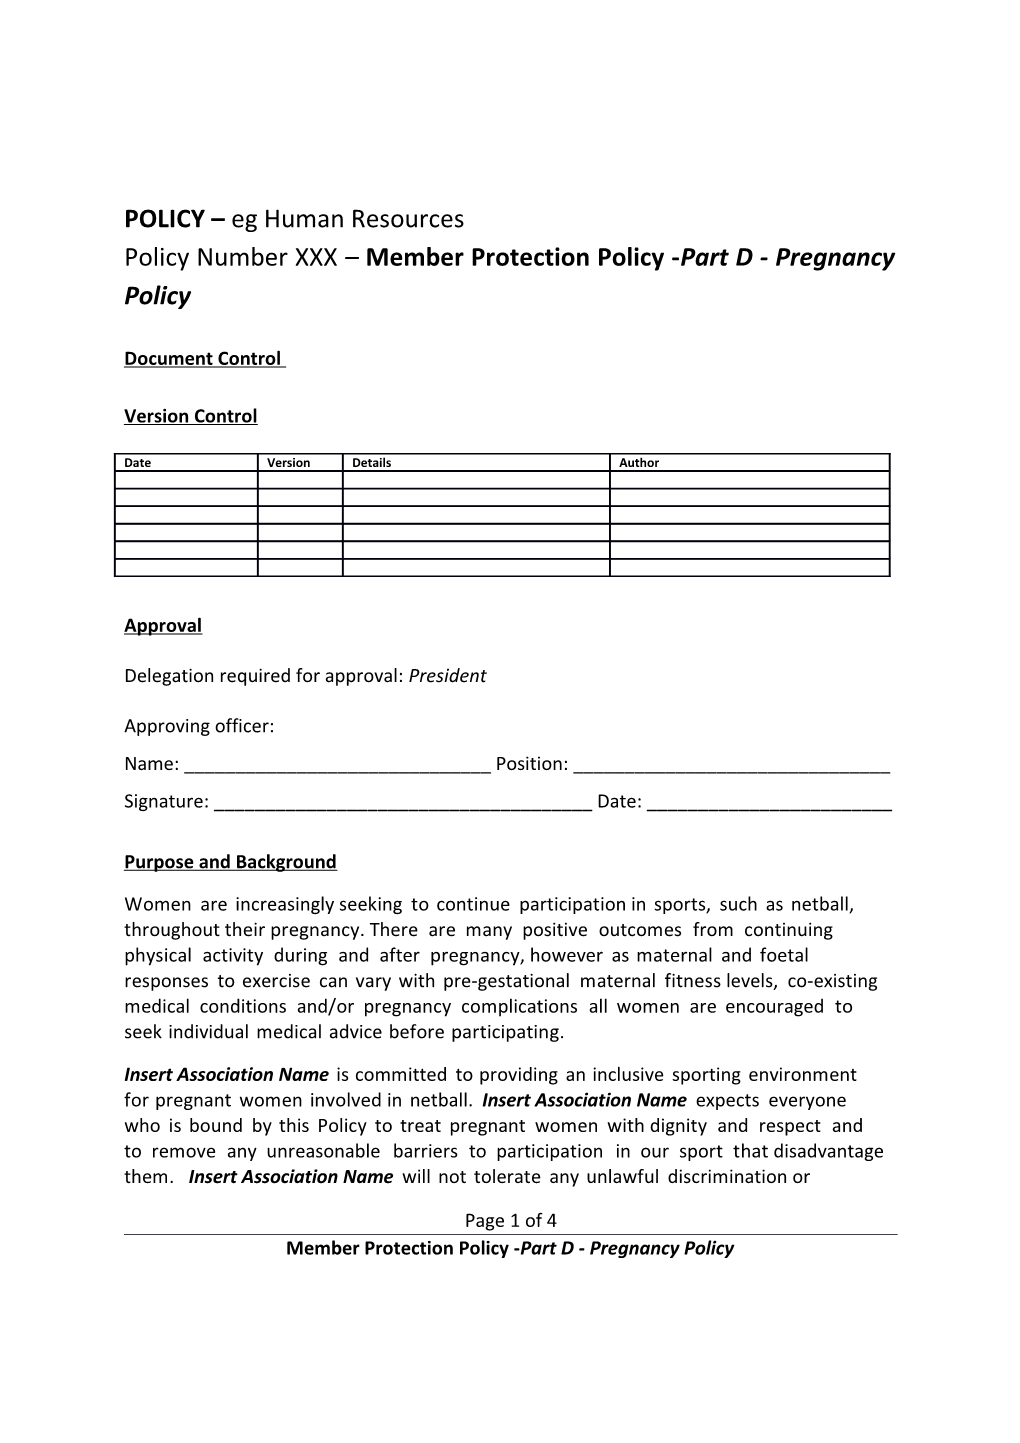 Policy Number XXX Member Protection Policy -Part D -Pregnancy Policy